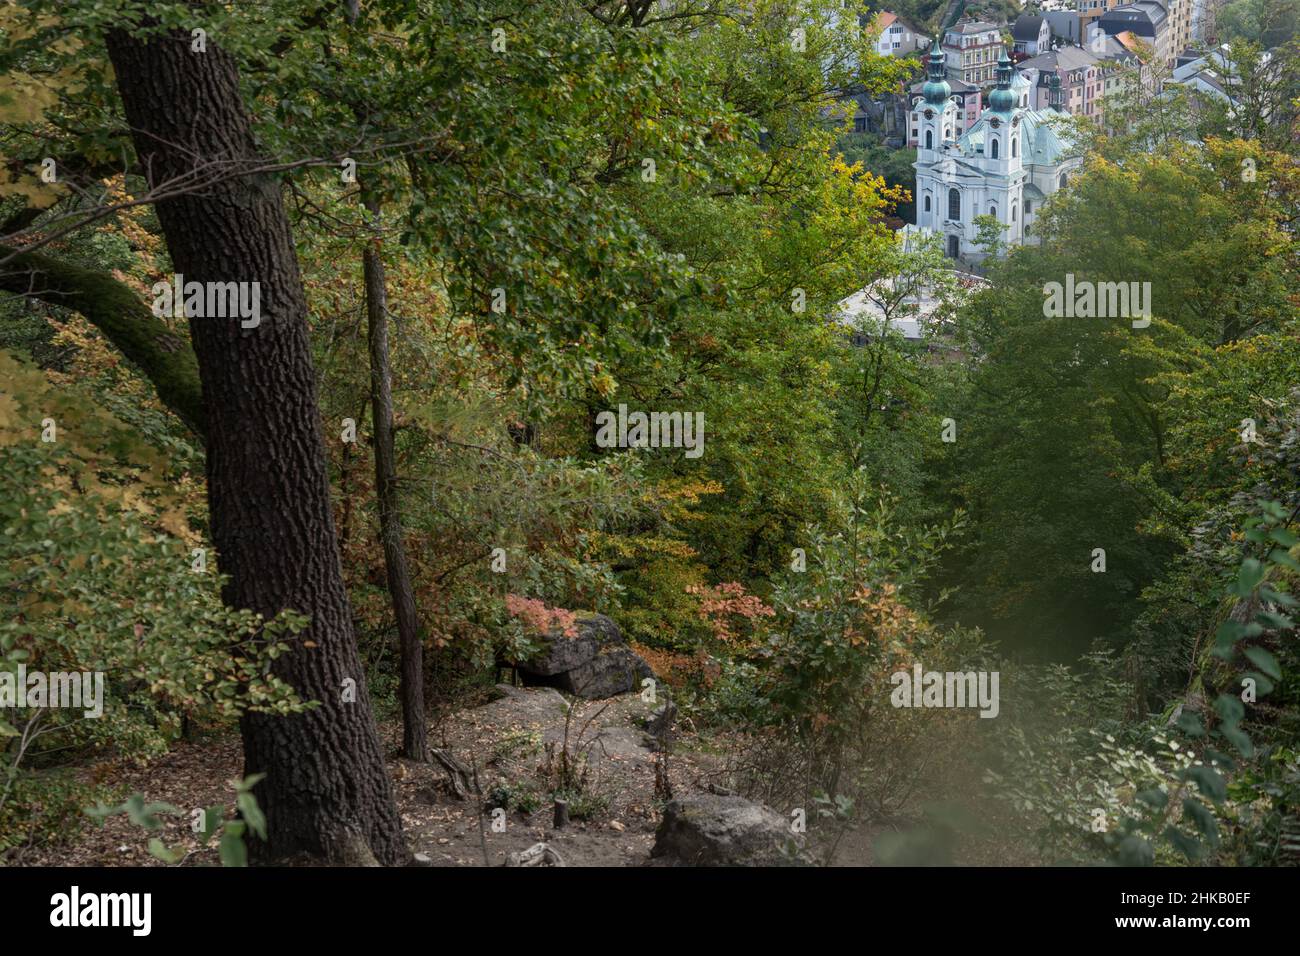 Karlovy Vary (Karlsbad) in Czech Republic: view from the Krystina lookout through a clearing in the trees at the church of Saint Mary Magdalene Stock Photo